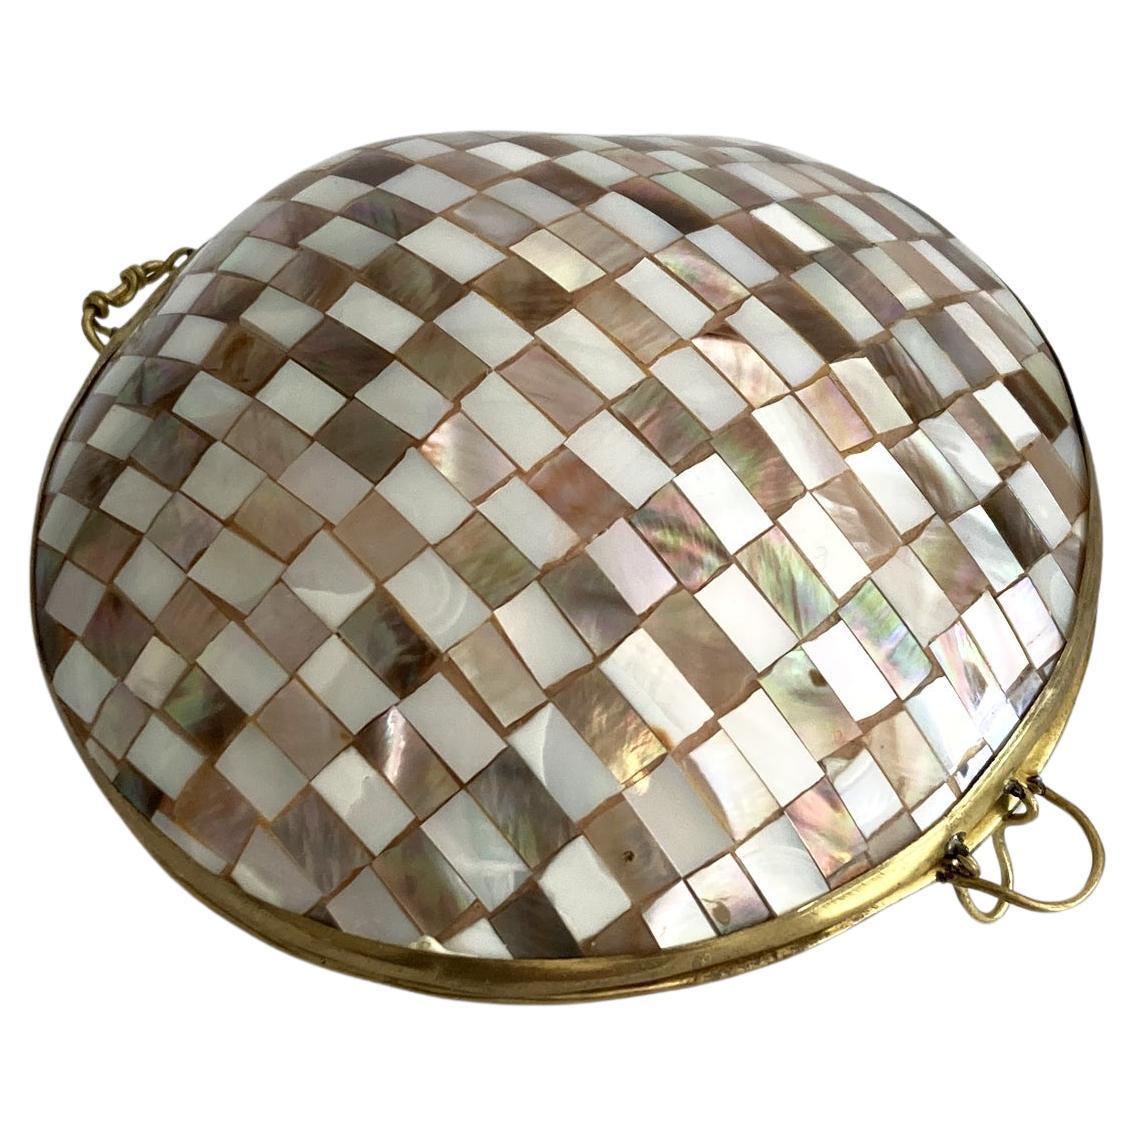 Vintage Hinged Seashell Box, in Checkerboard Mother of Pearl Mosaic, Brass Trim